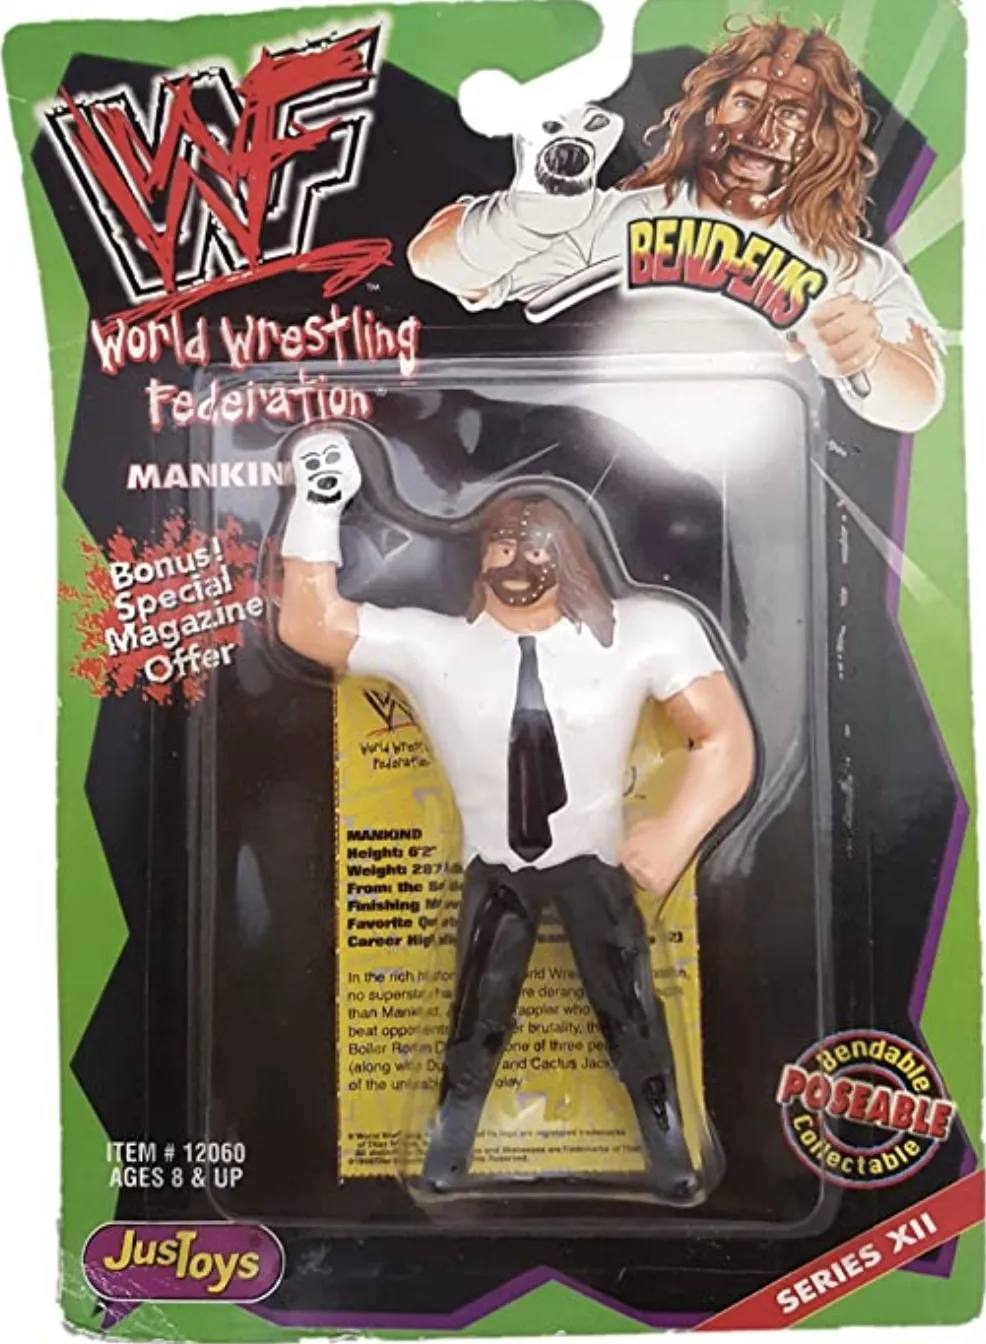 Mankind Bendems 2 action figure